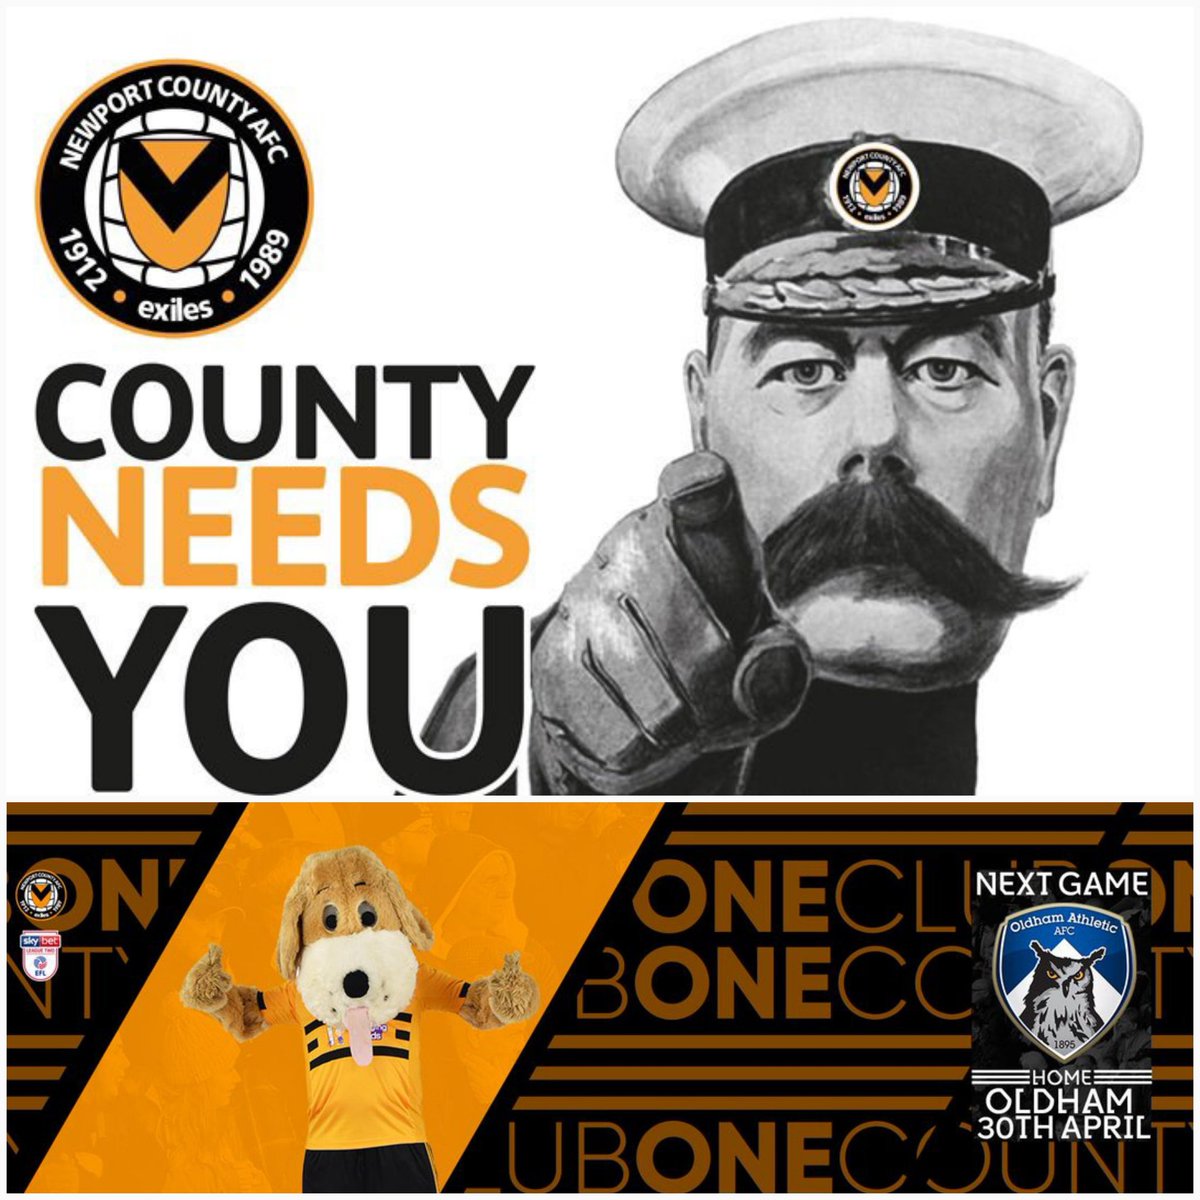 All the people who supported @NewportCounty in the FA Cup, come over to Rodney Parade there is a massive game Tuesday evening - 'COUNTY NEEDS YOU' for the playoffs push! 🖤💛 #newportcounty #playoffs #utc #supporttheport #fighttilltheend #believe #ourjourneycontinues